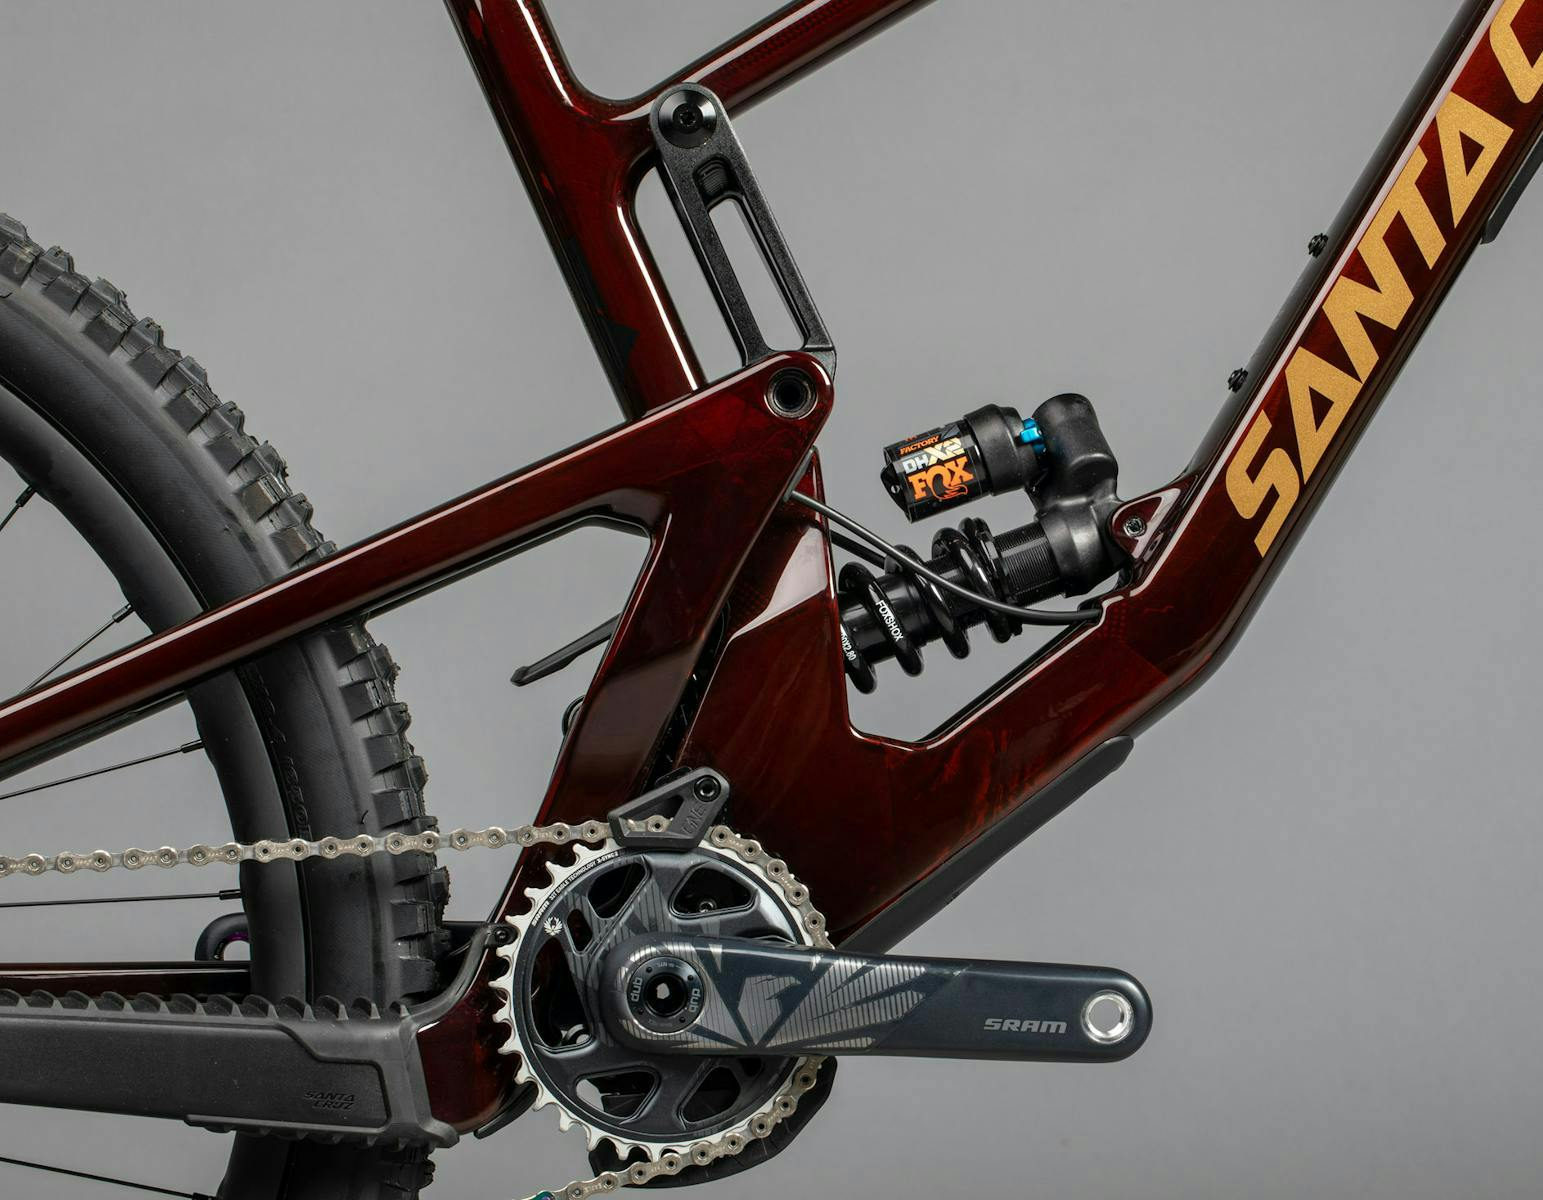 The Santa Cruz Nomad 5 - crank, rear shock, and front and rear triangles